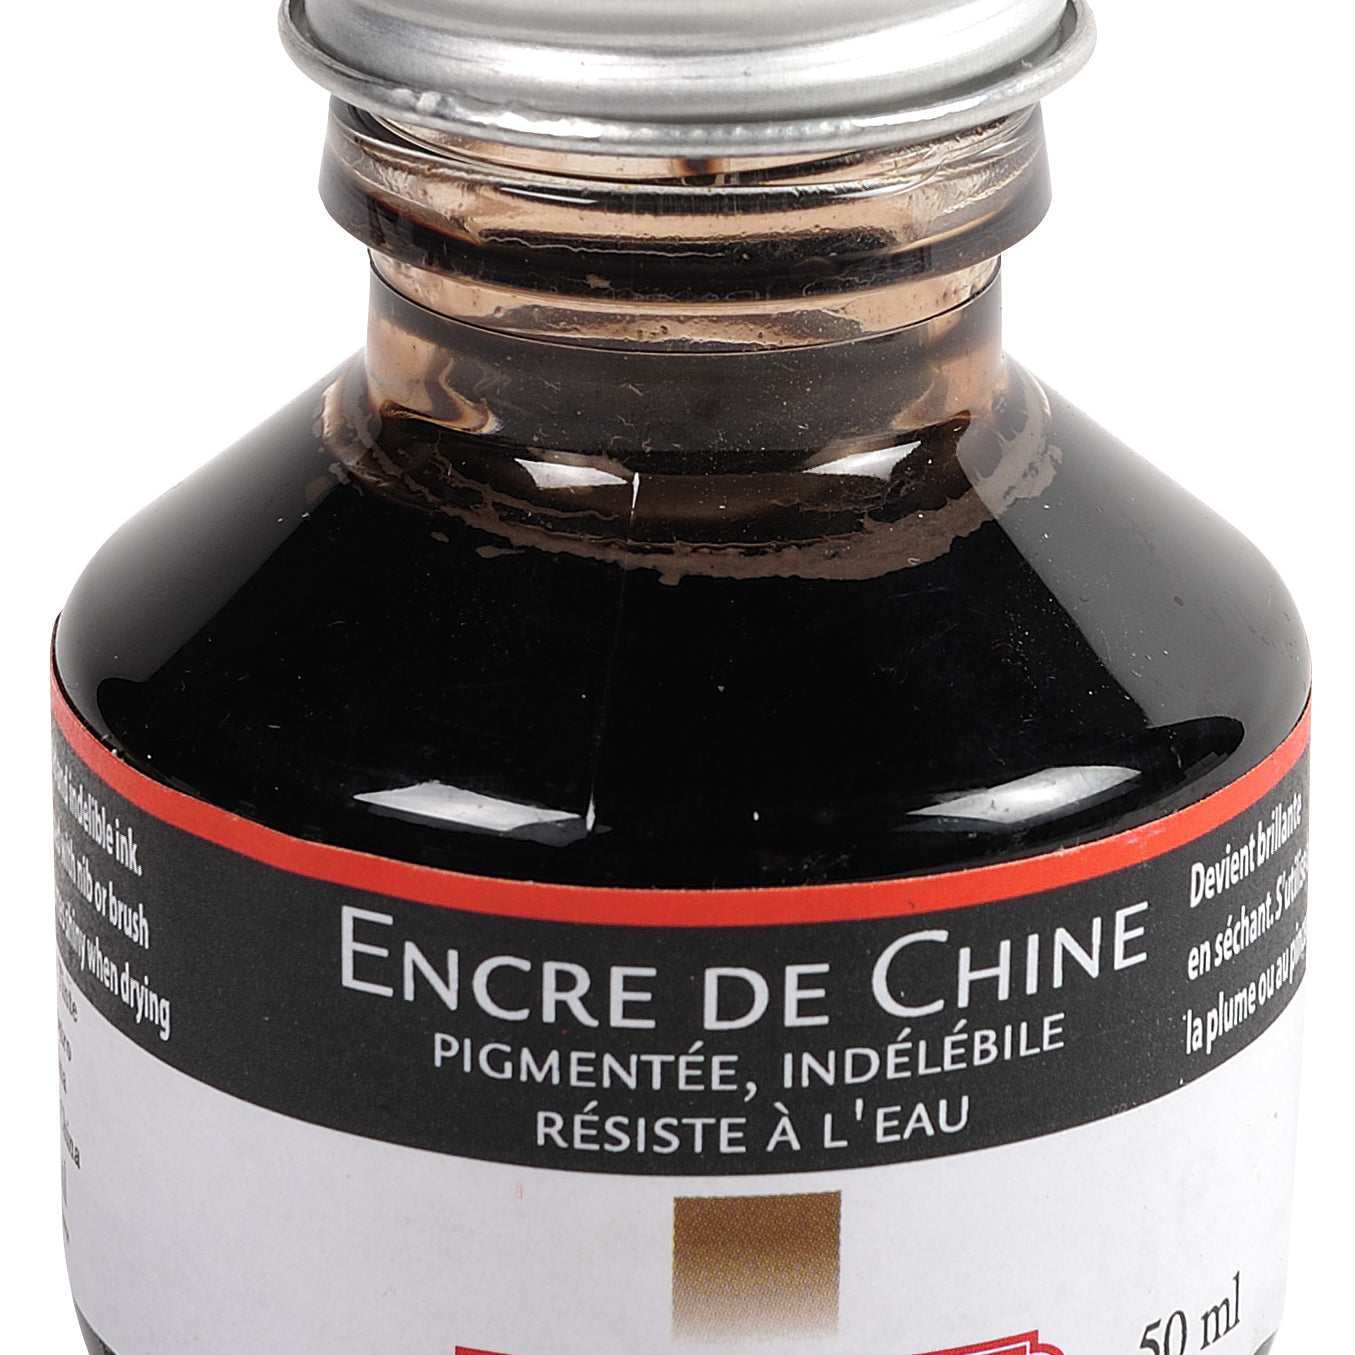 JACQUES HERBIN India Ink 50ml Brown Default Title